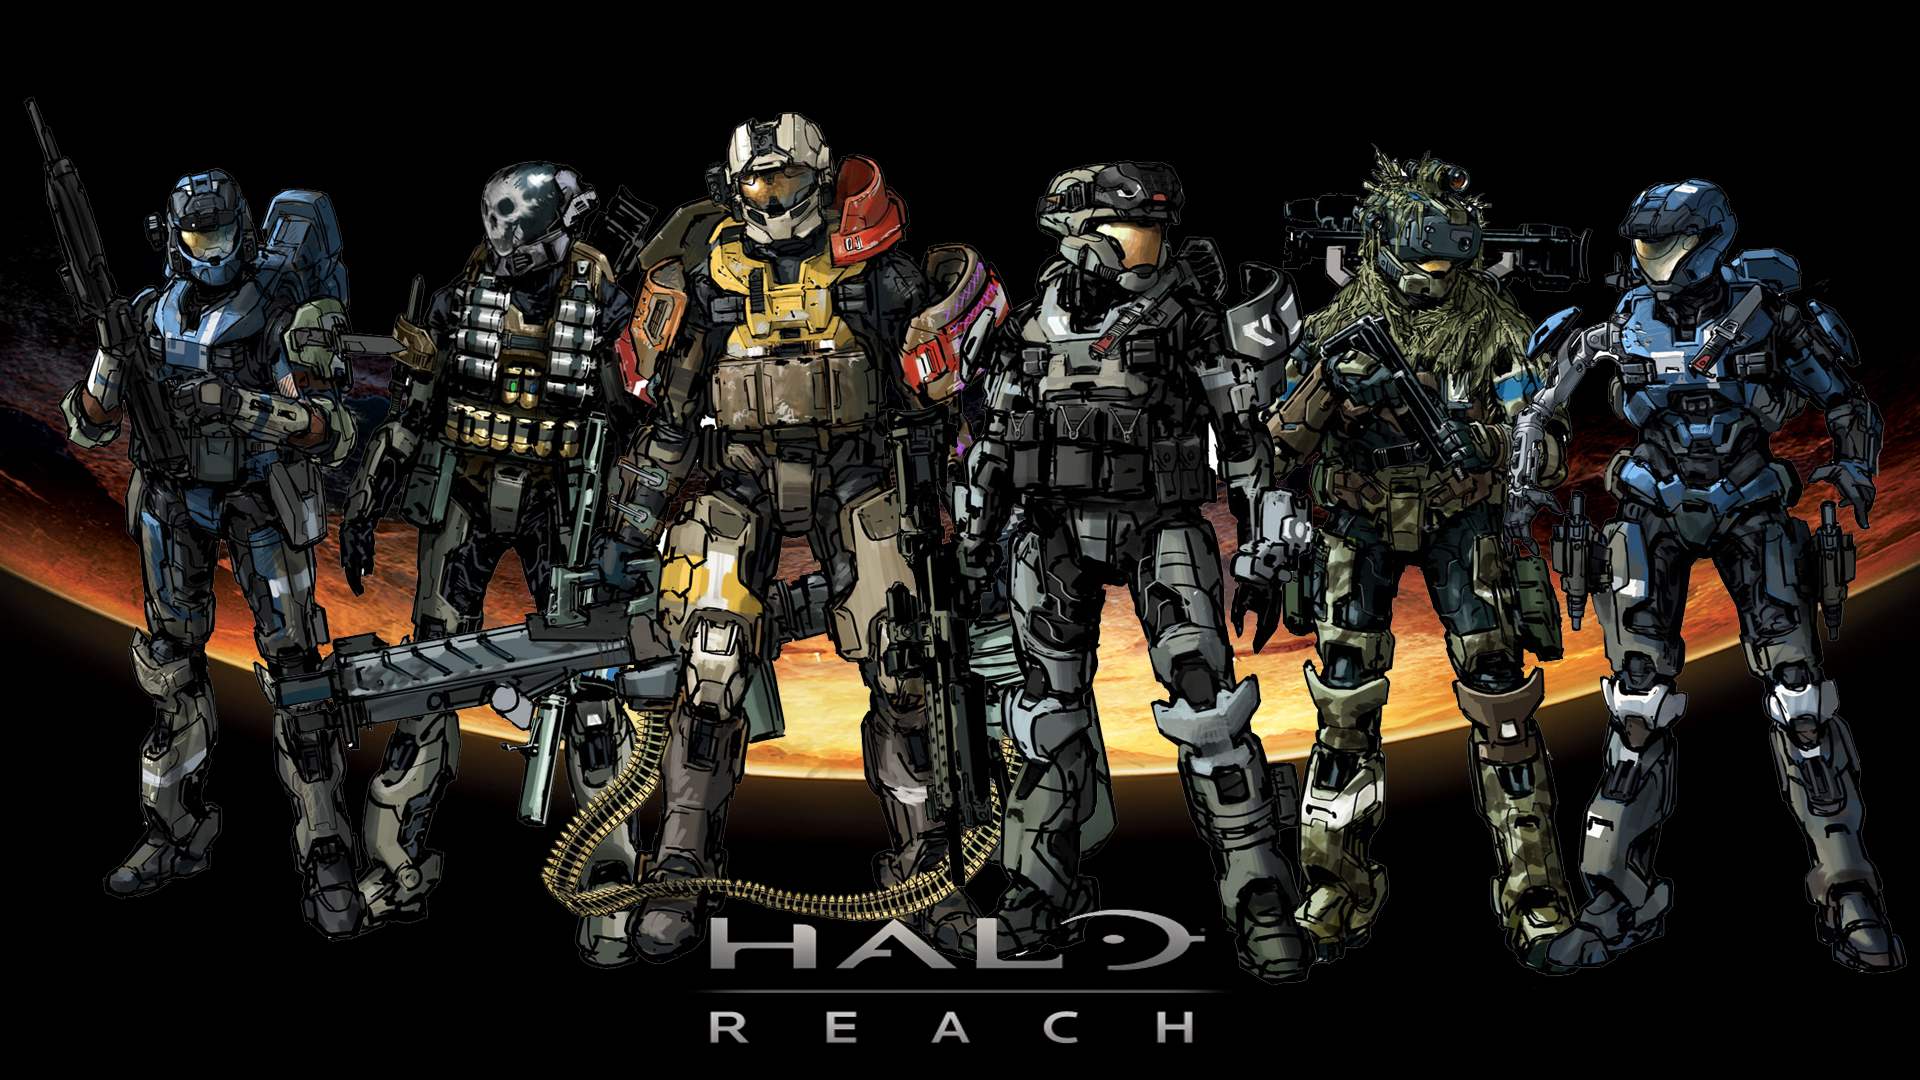 Halo Reach Wallpapers in HD